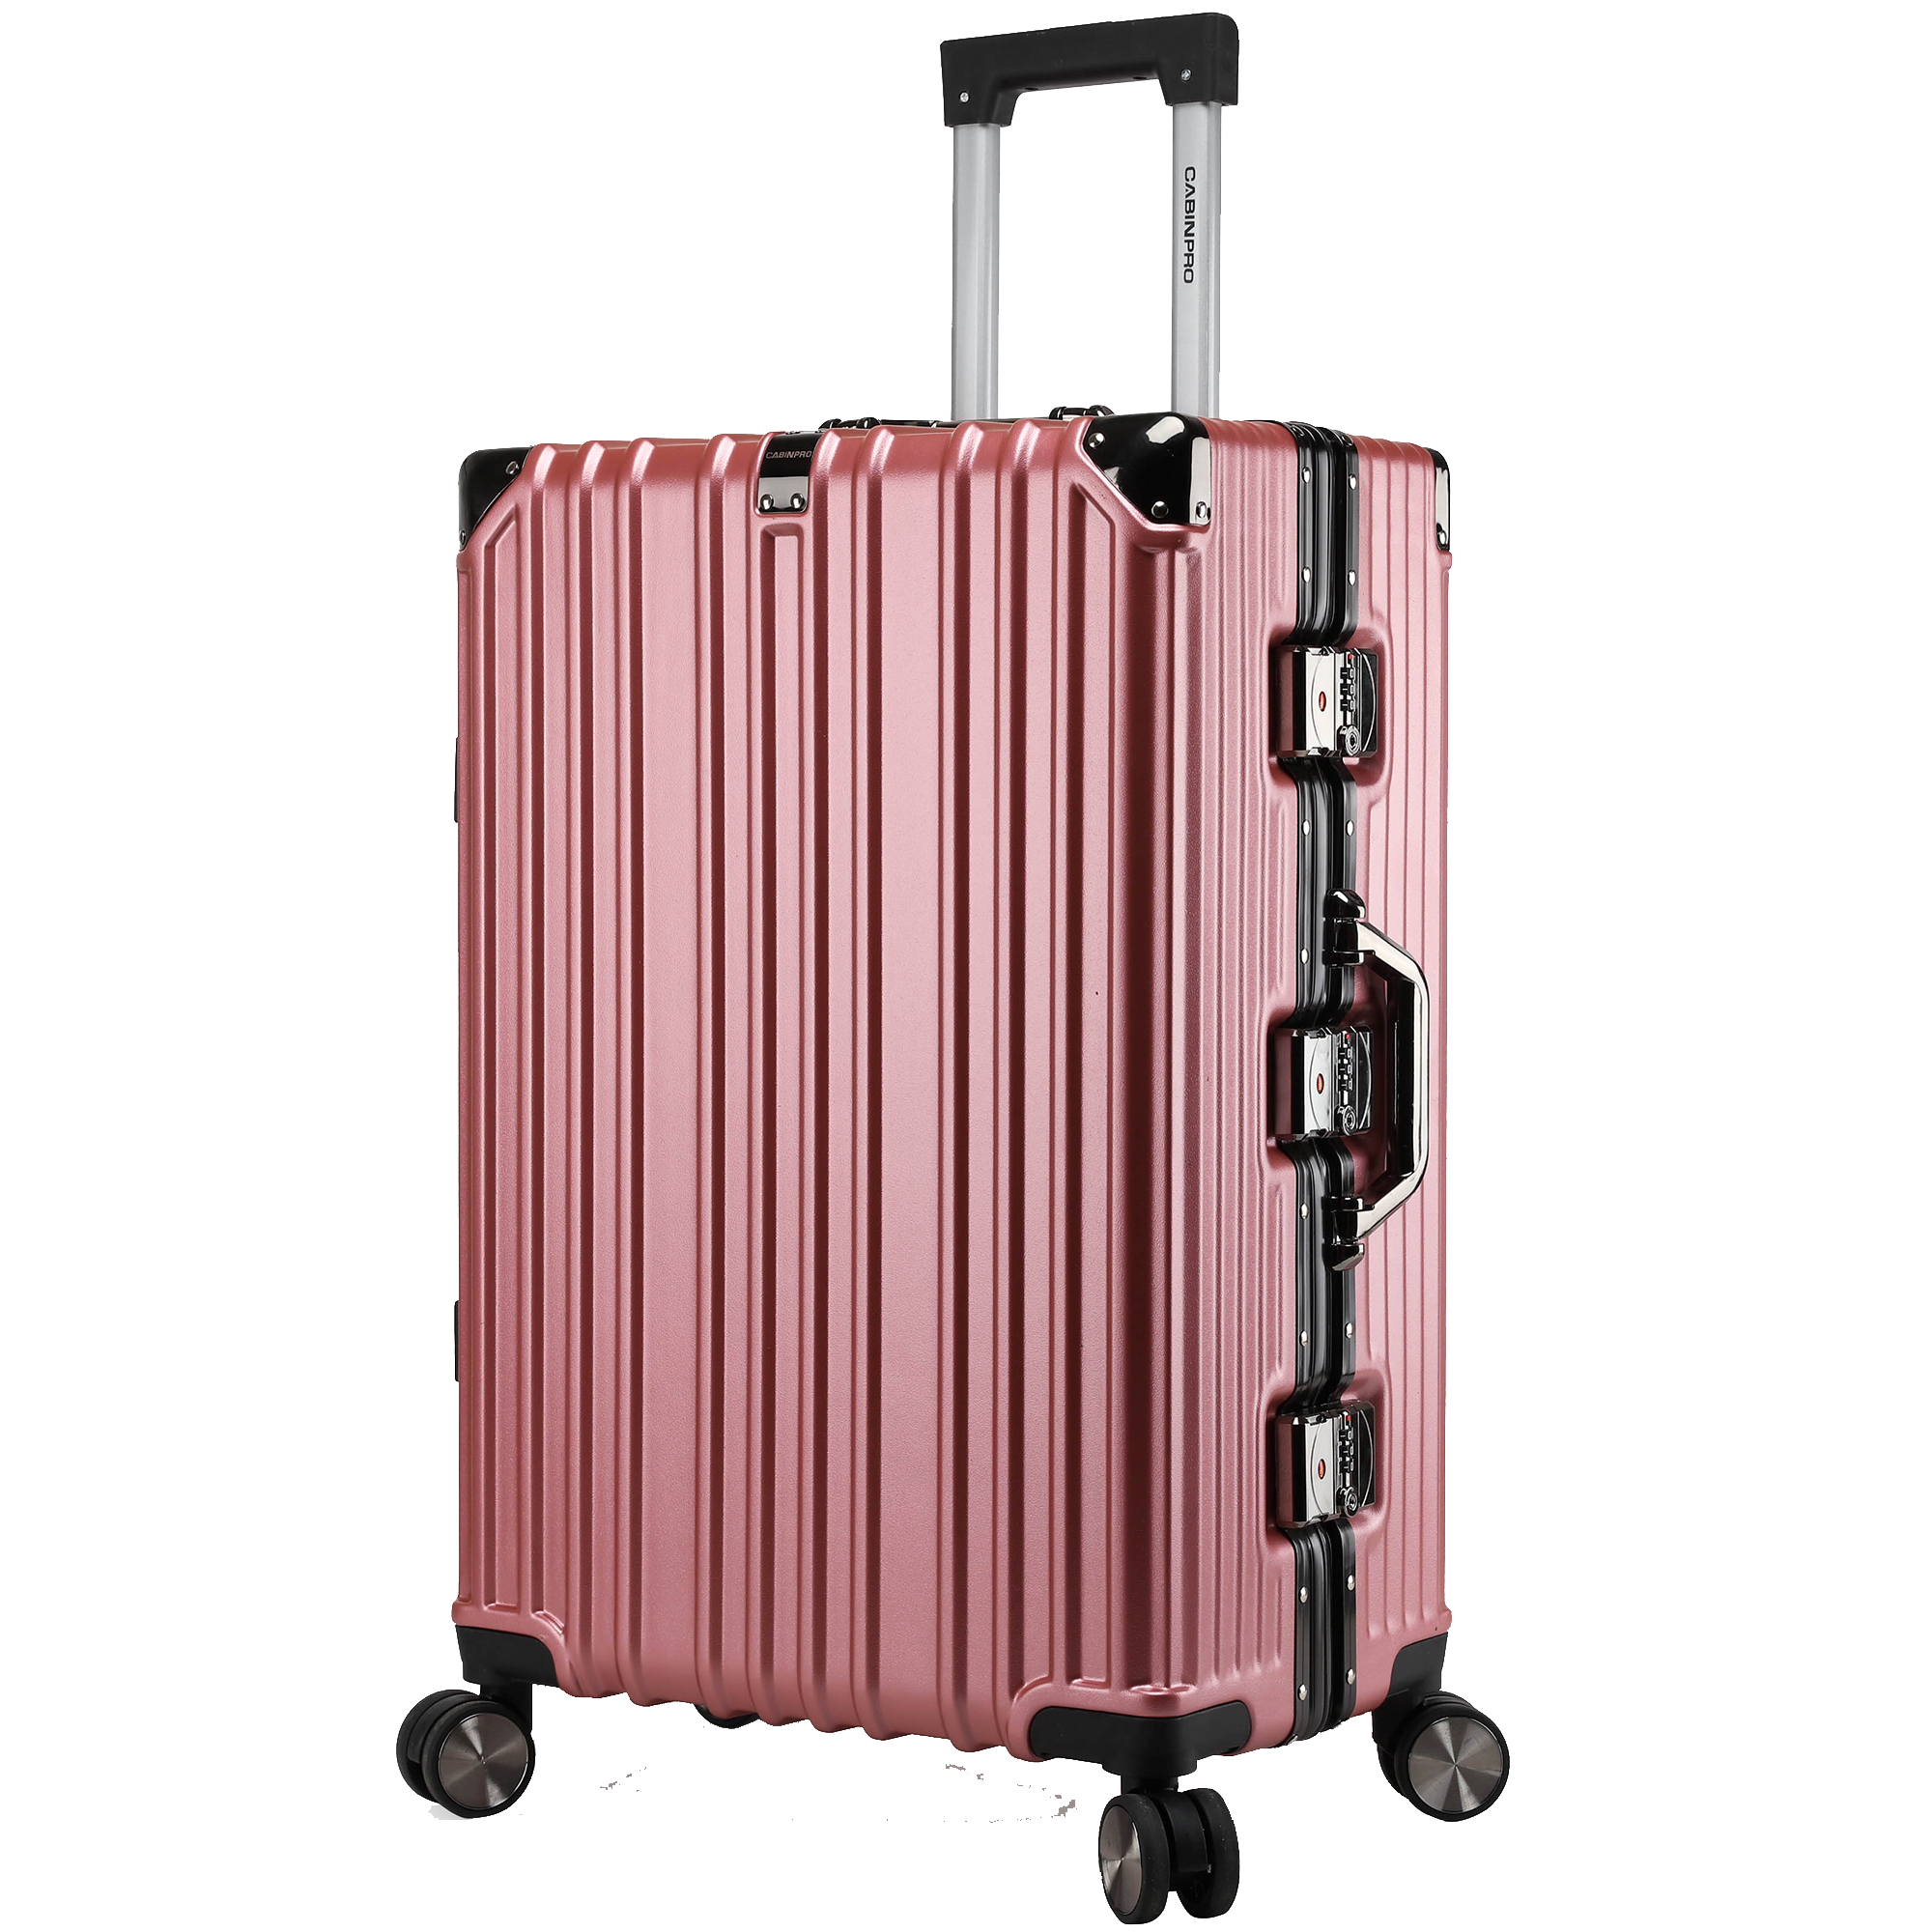 Eminent Hard-Shell Luggage 29 Large Size Lightweight Check In Luggage,  Zipper-Less Carry-On With 4 Spinner Wheels - Light Silver